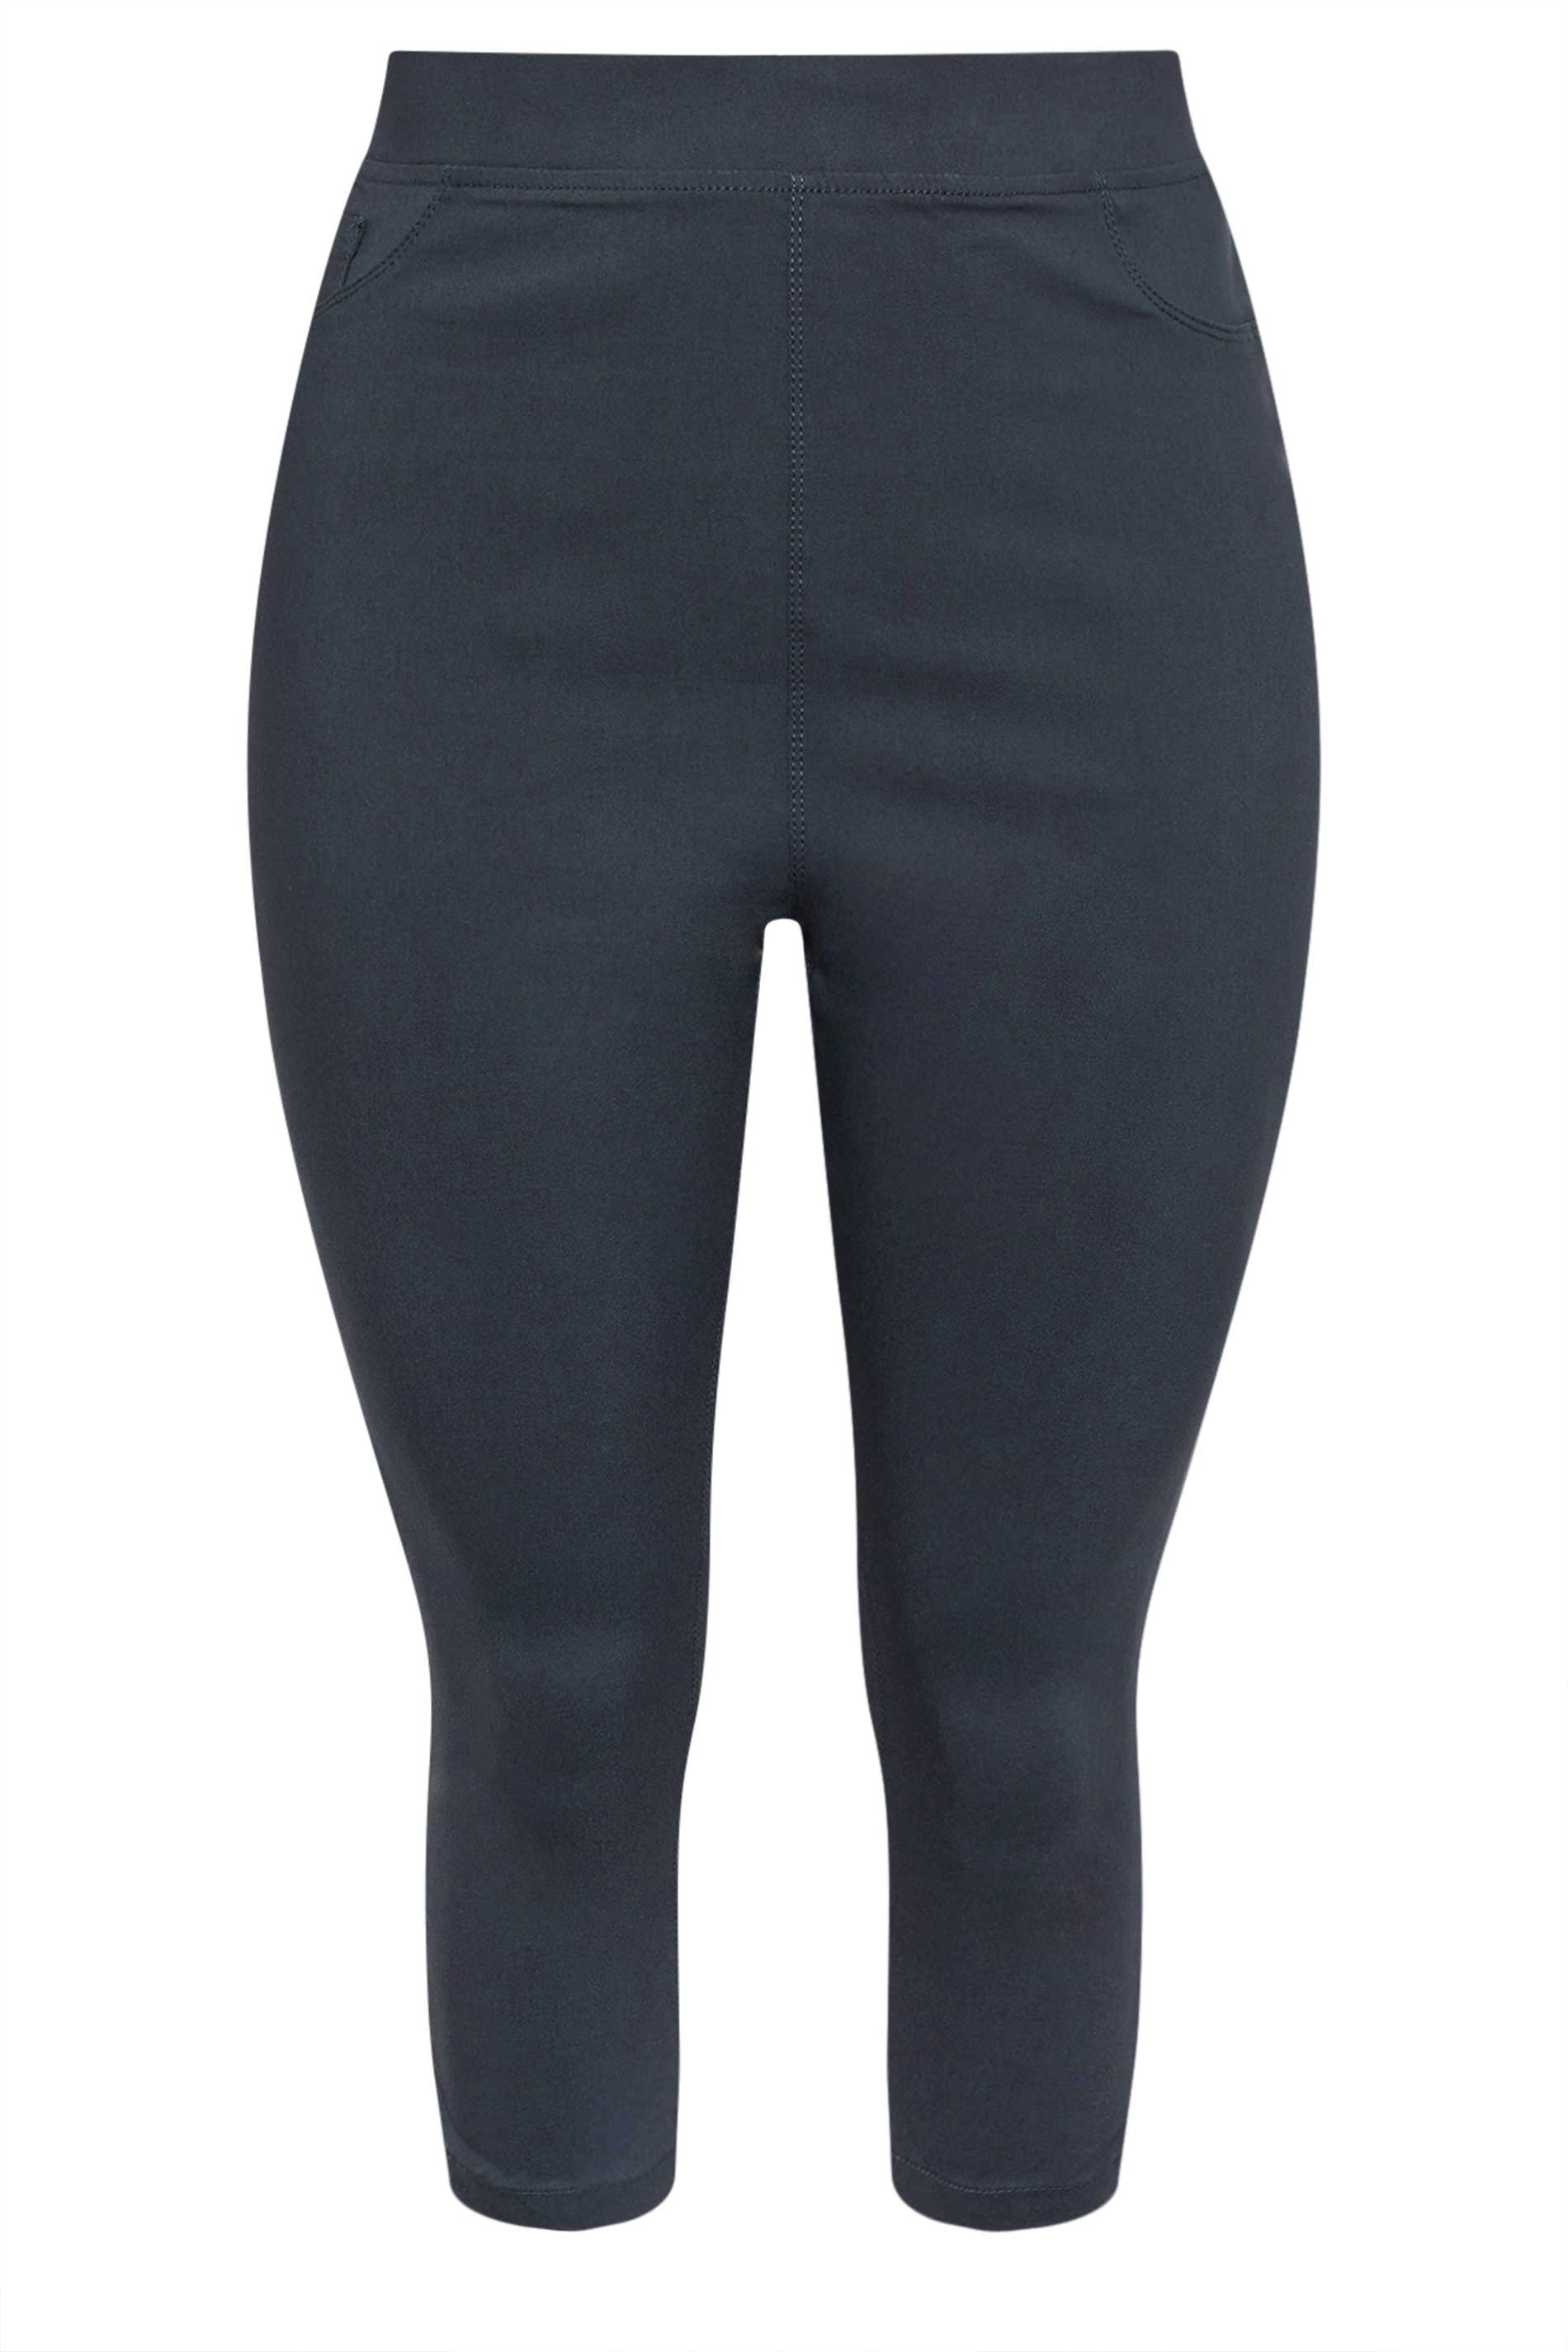 Navy Blue Bengaline Cropped Pull On Trousers, plus size 16 to 36 3